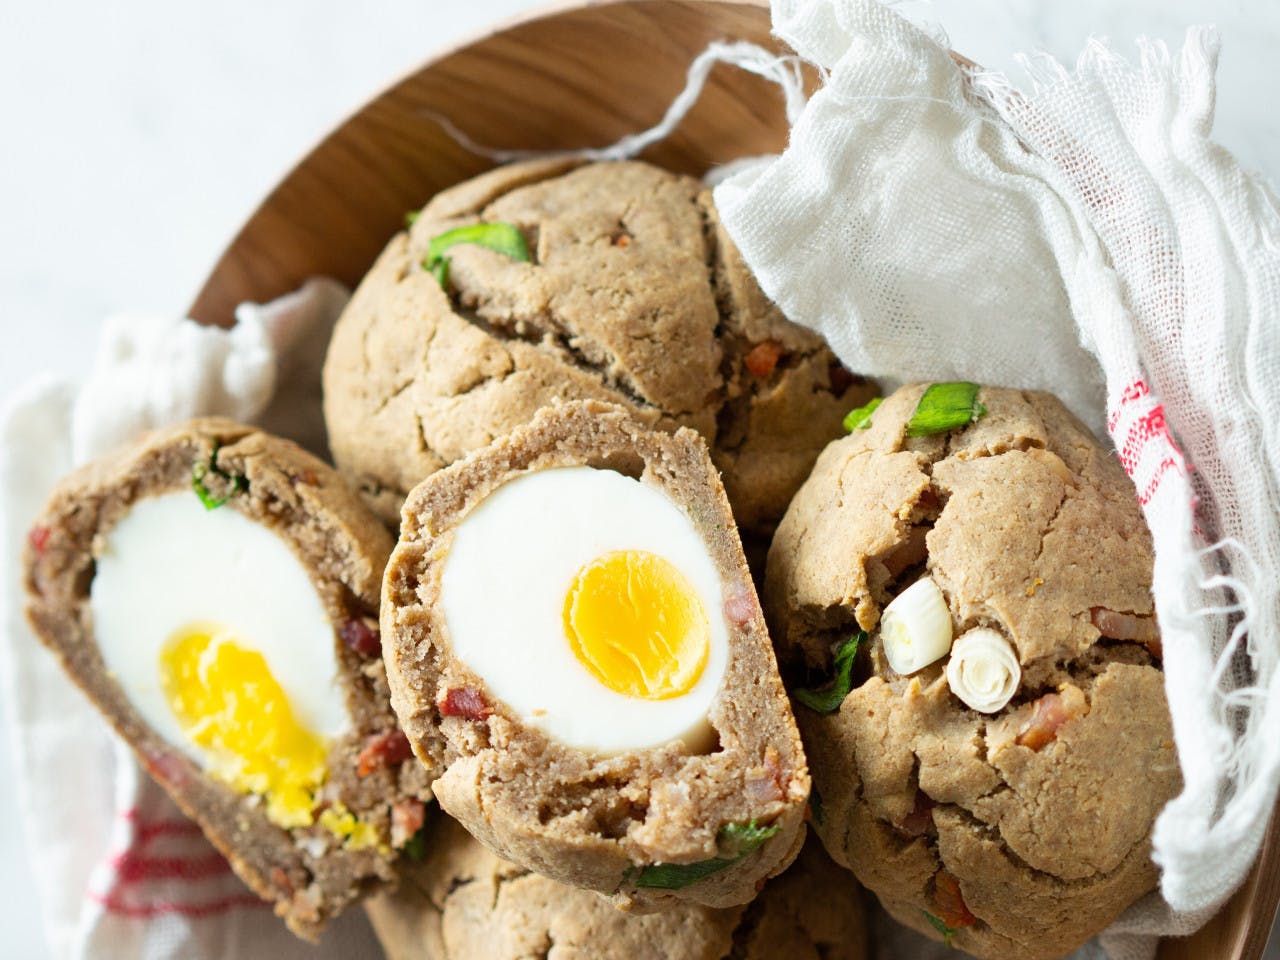 Stuffed paleo easter rolls with bacon and egg